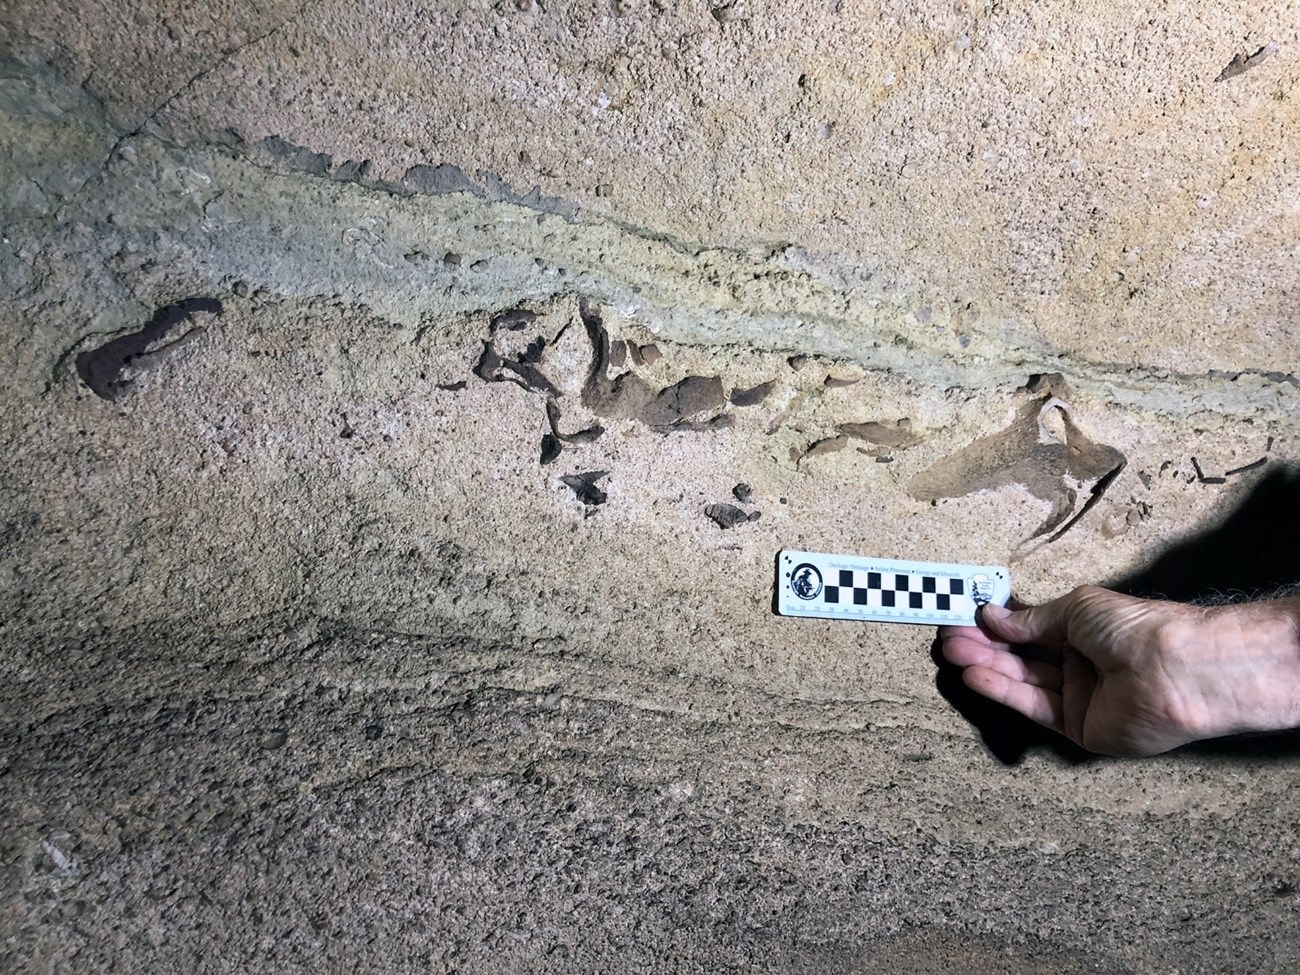 fossils in a cave wall with a person's hand holding a ruler scale